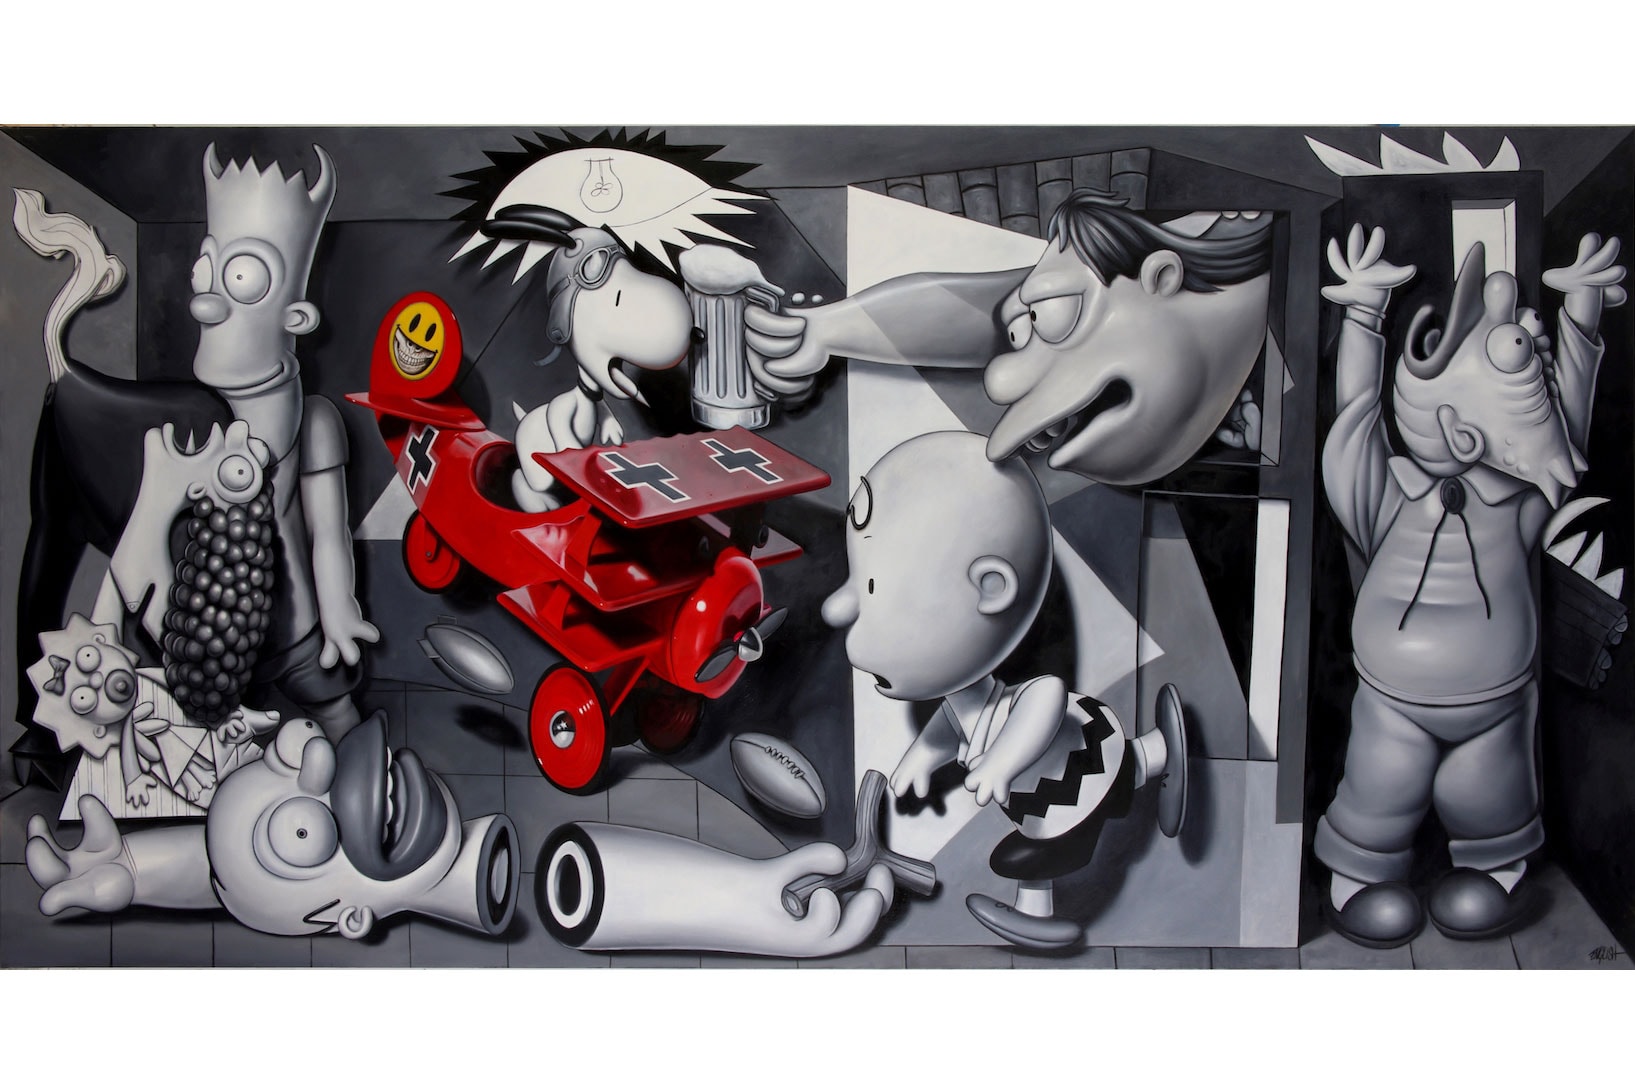 'Ron English Guernica' at the Allouche Gallery in NYC